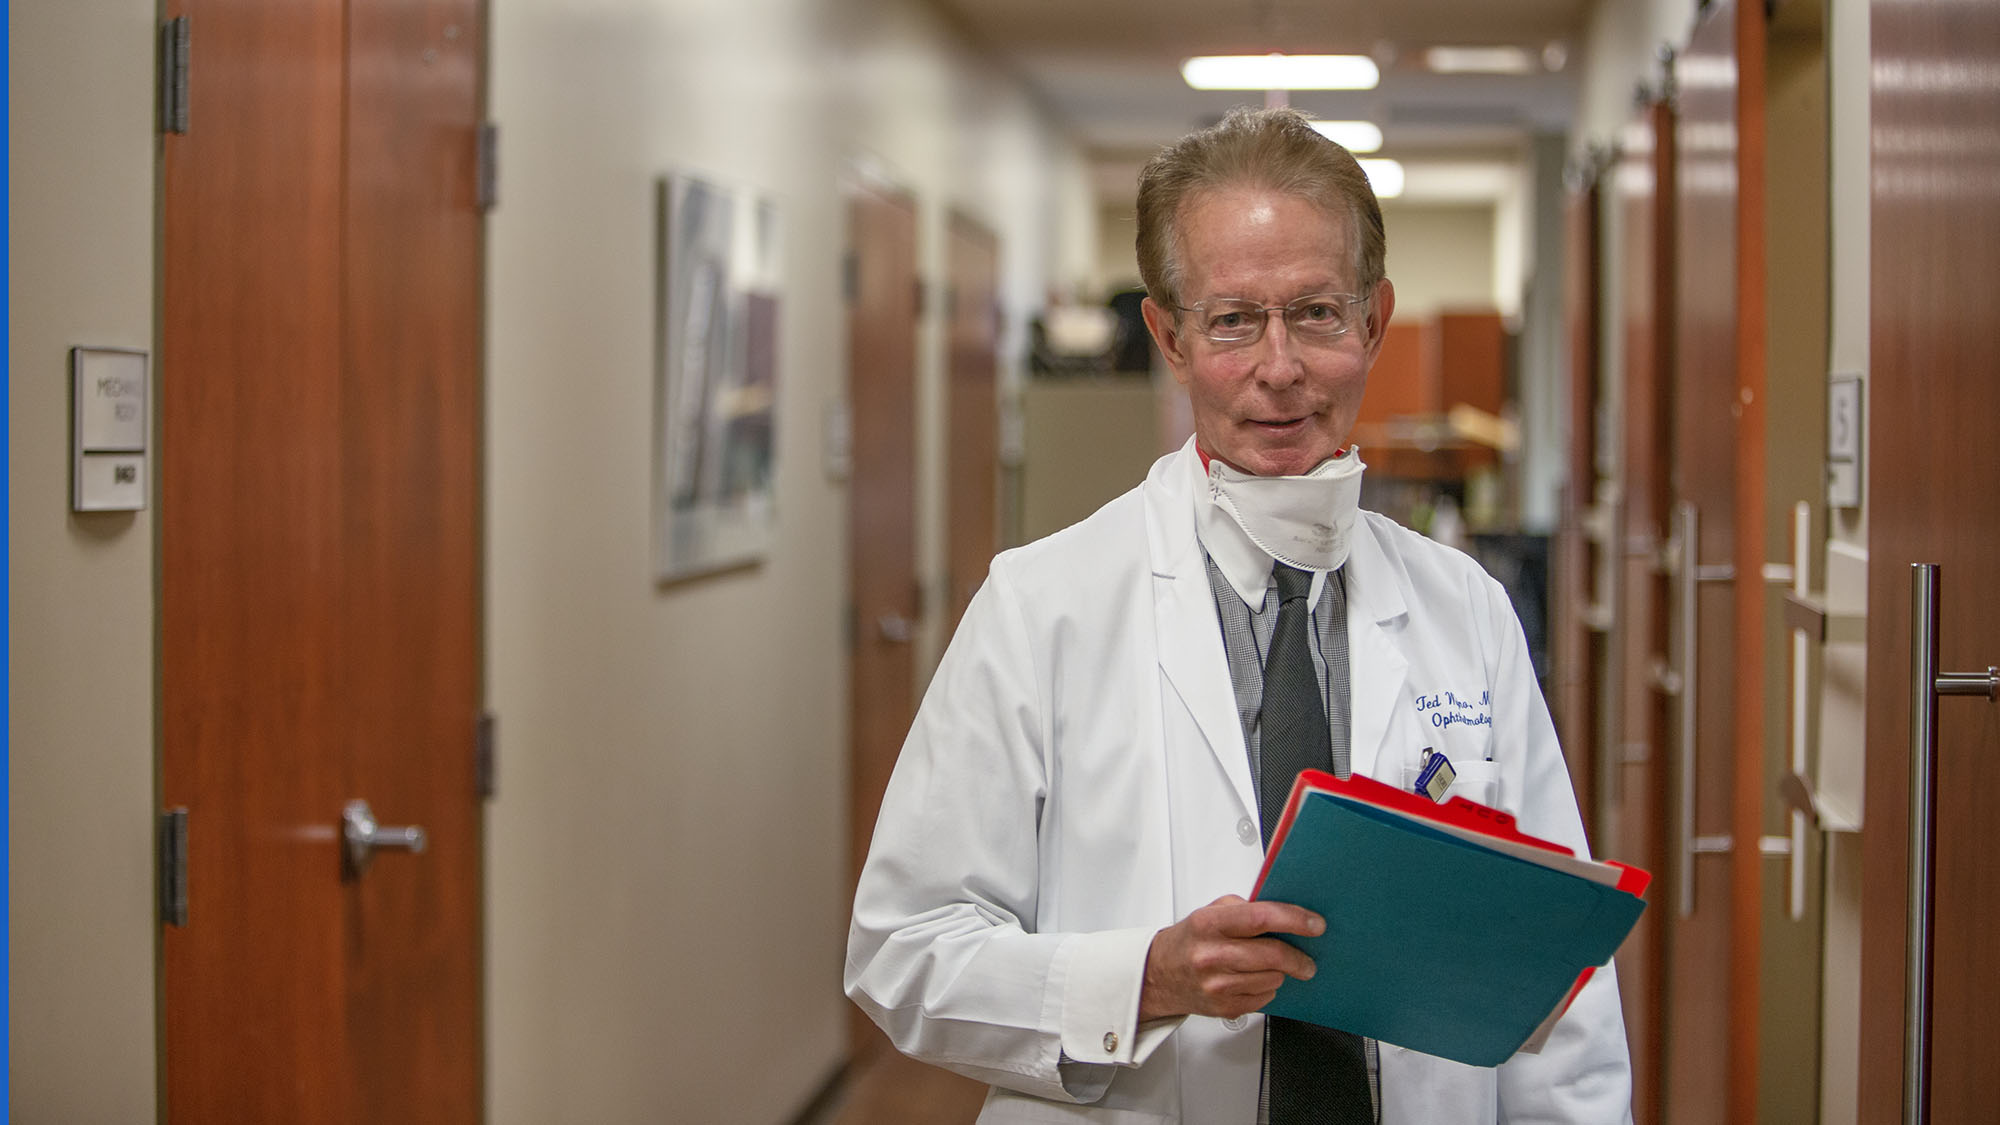 Dr. Ted Wojno, holding a patient file